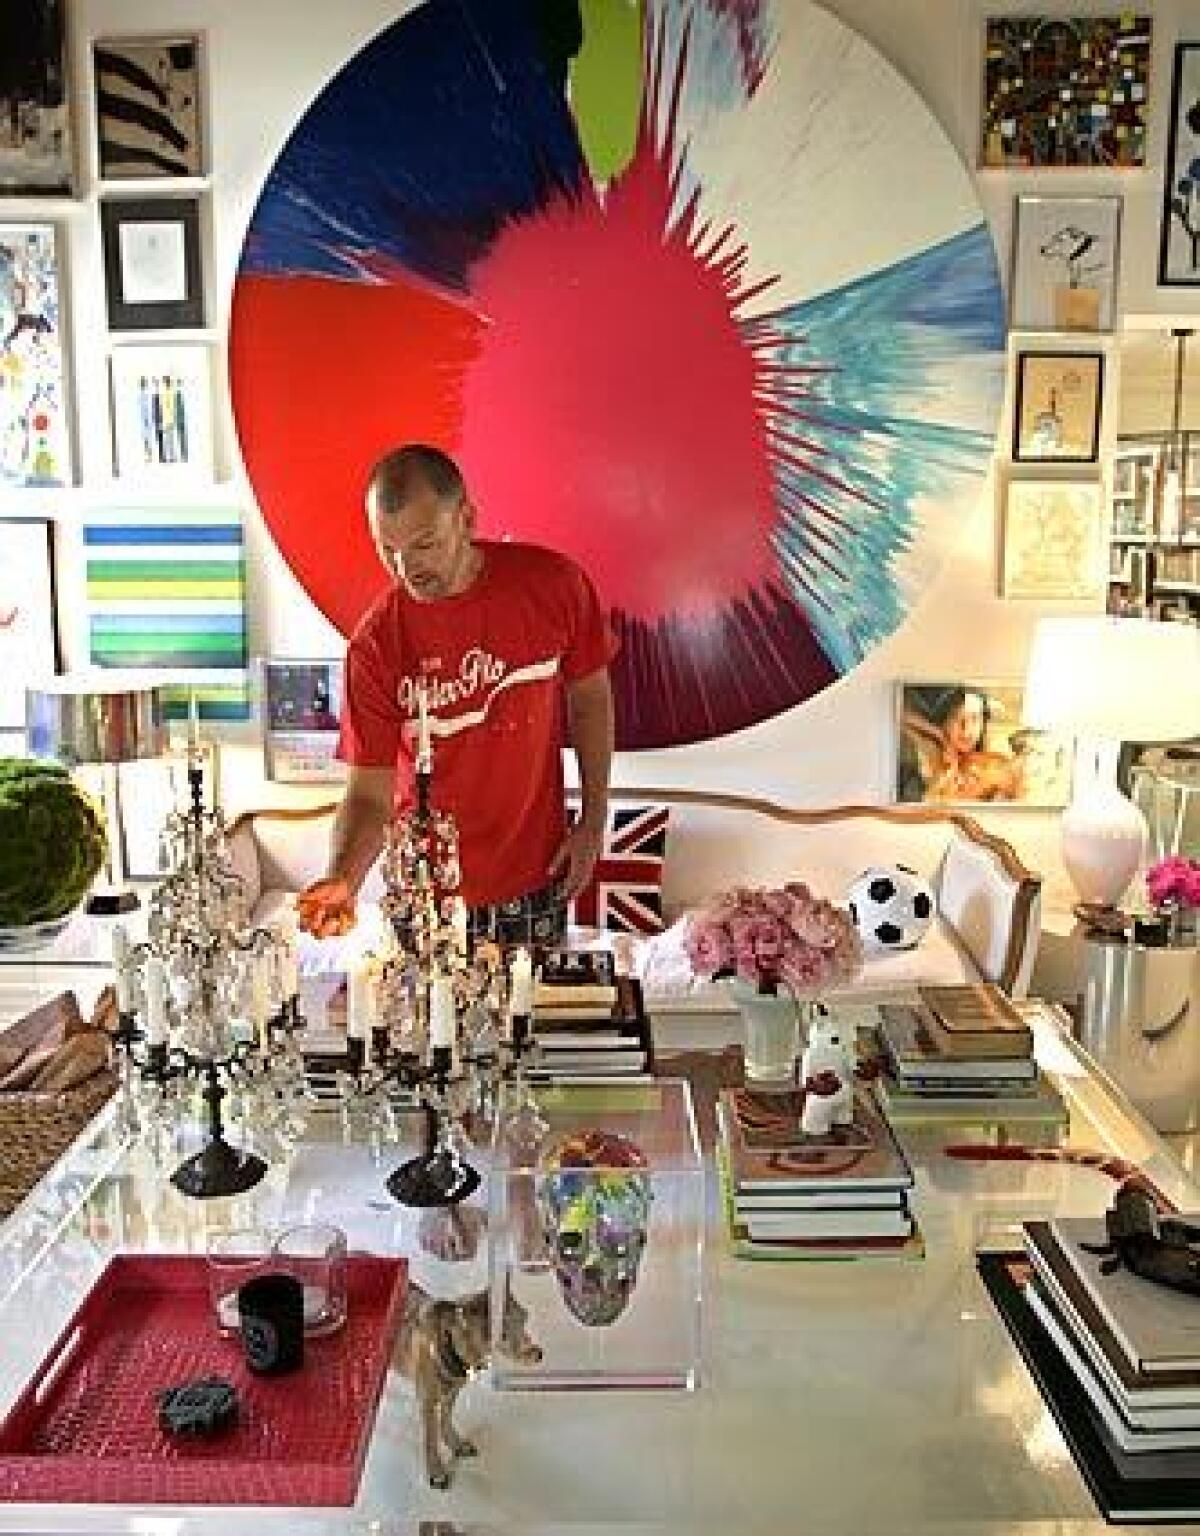 Johnson Hartig, co-designer of clothing line Libertine, lights a candelabra at the 1920s Mediterranean bungalow he renovated in Los Angeles' Hancock Park area. A huge spin-art work by Damien Hirst radiates color in the living room, dominated by an oversized Lucite table.